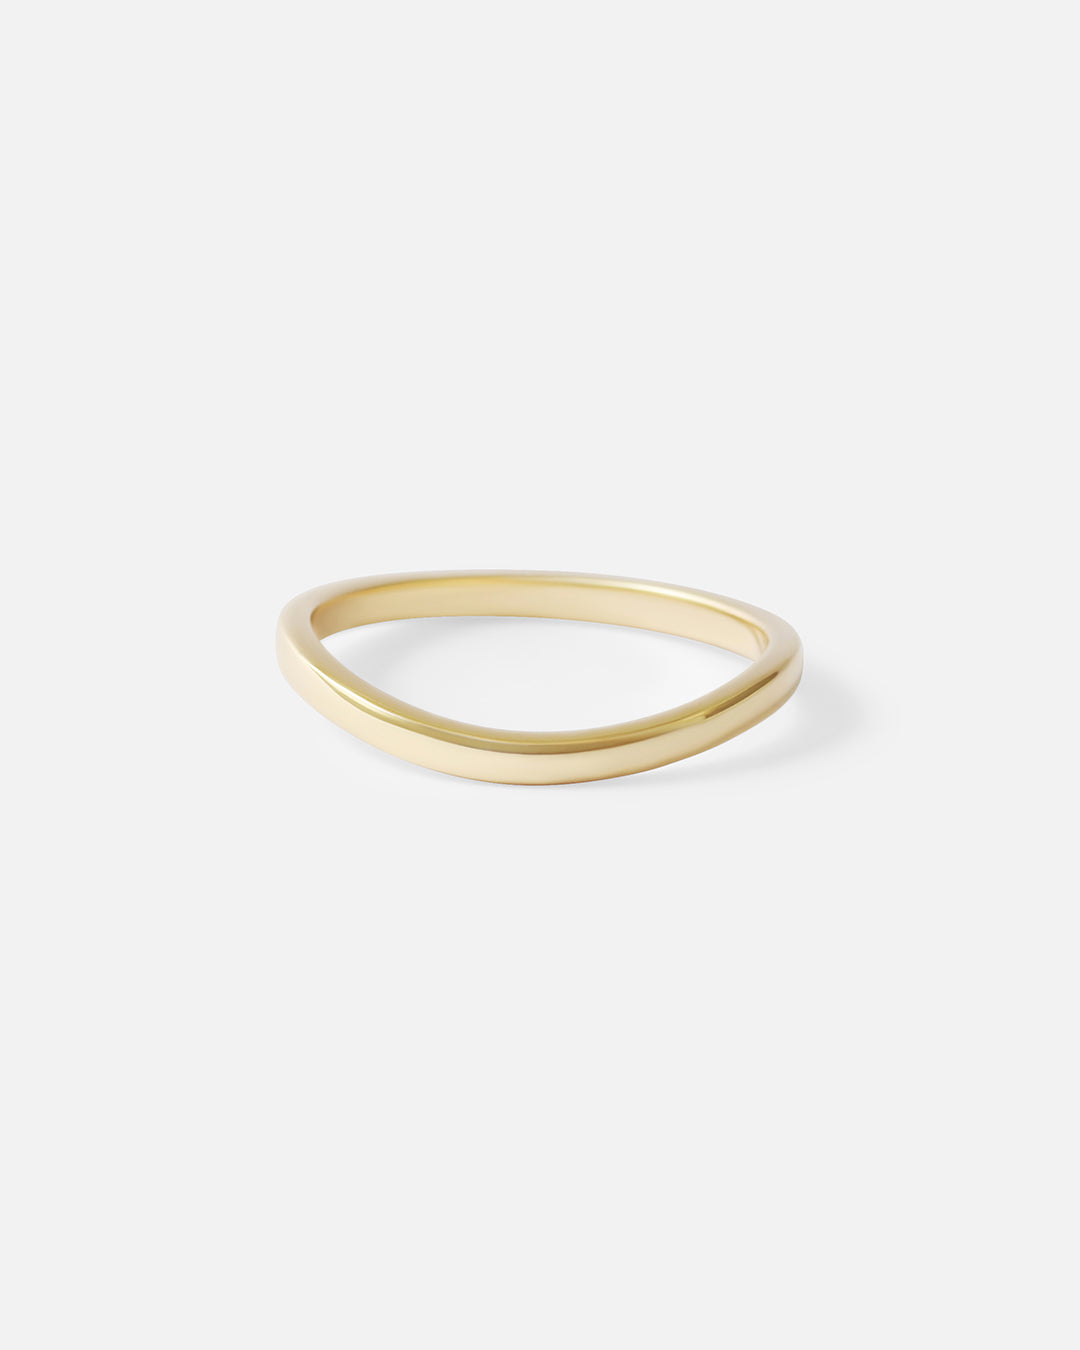 Eve / 2mm Curve Ring By Casual Seance in Wedding Bands Category